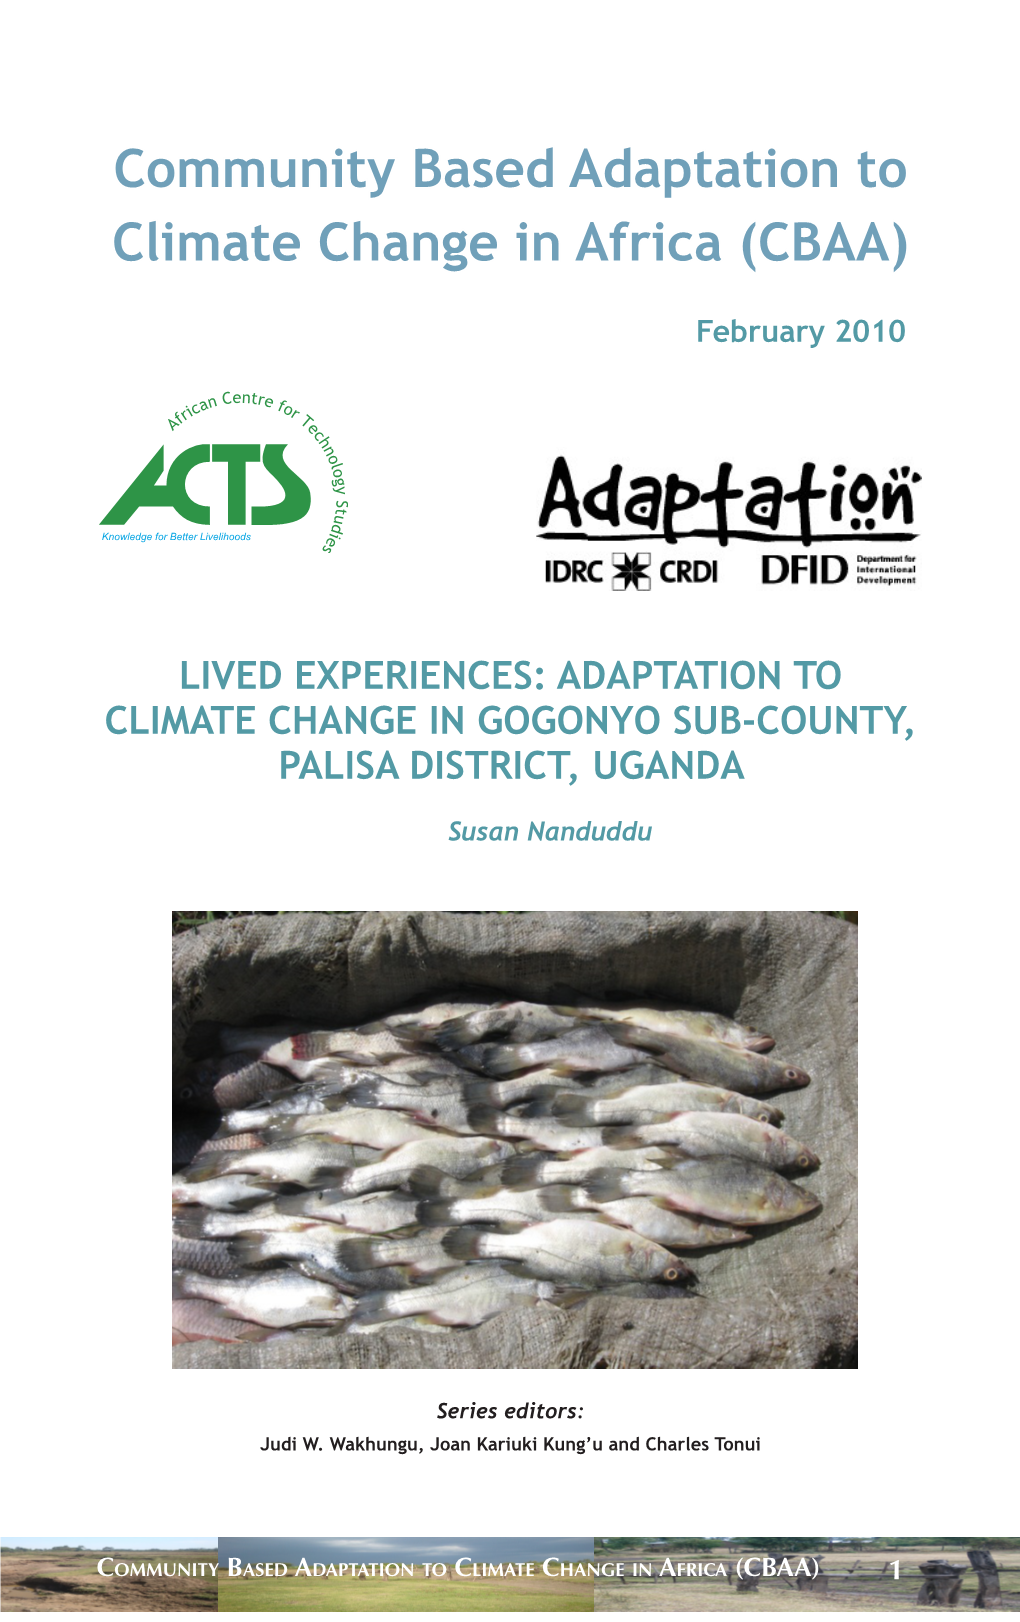 Community Based Adaptation to Climate Change in Africa (CBAA)